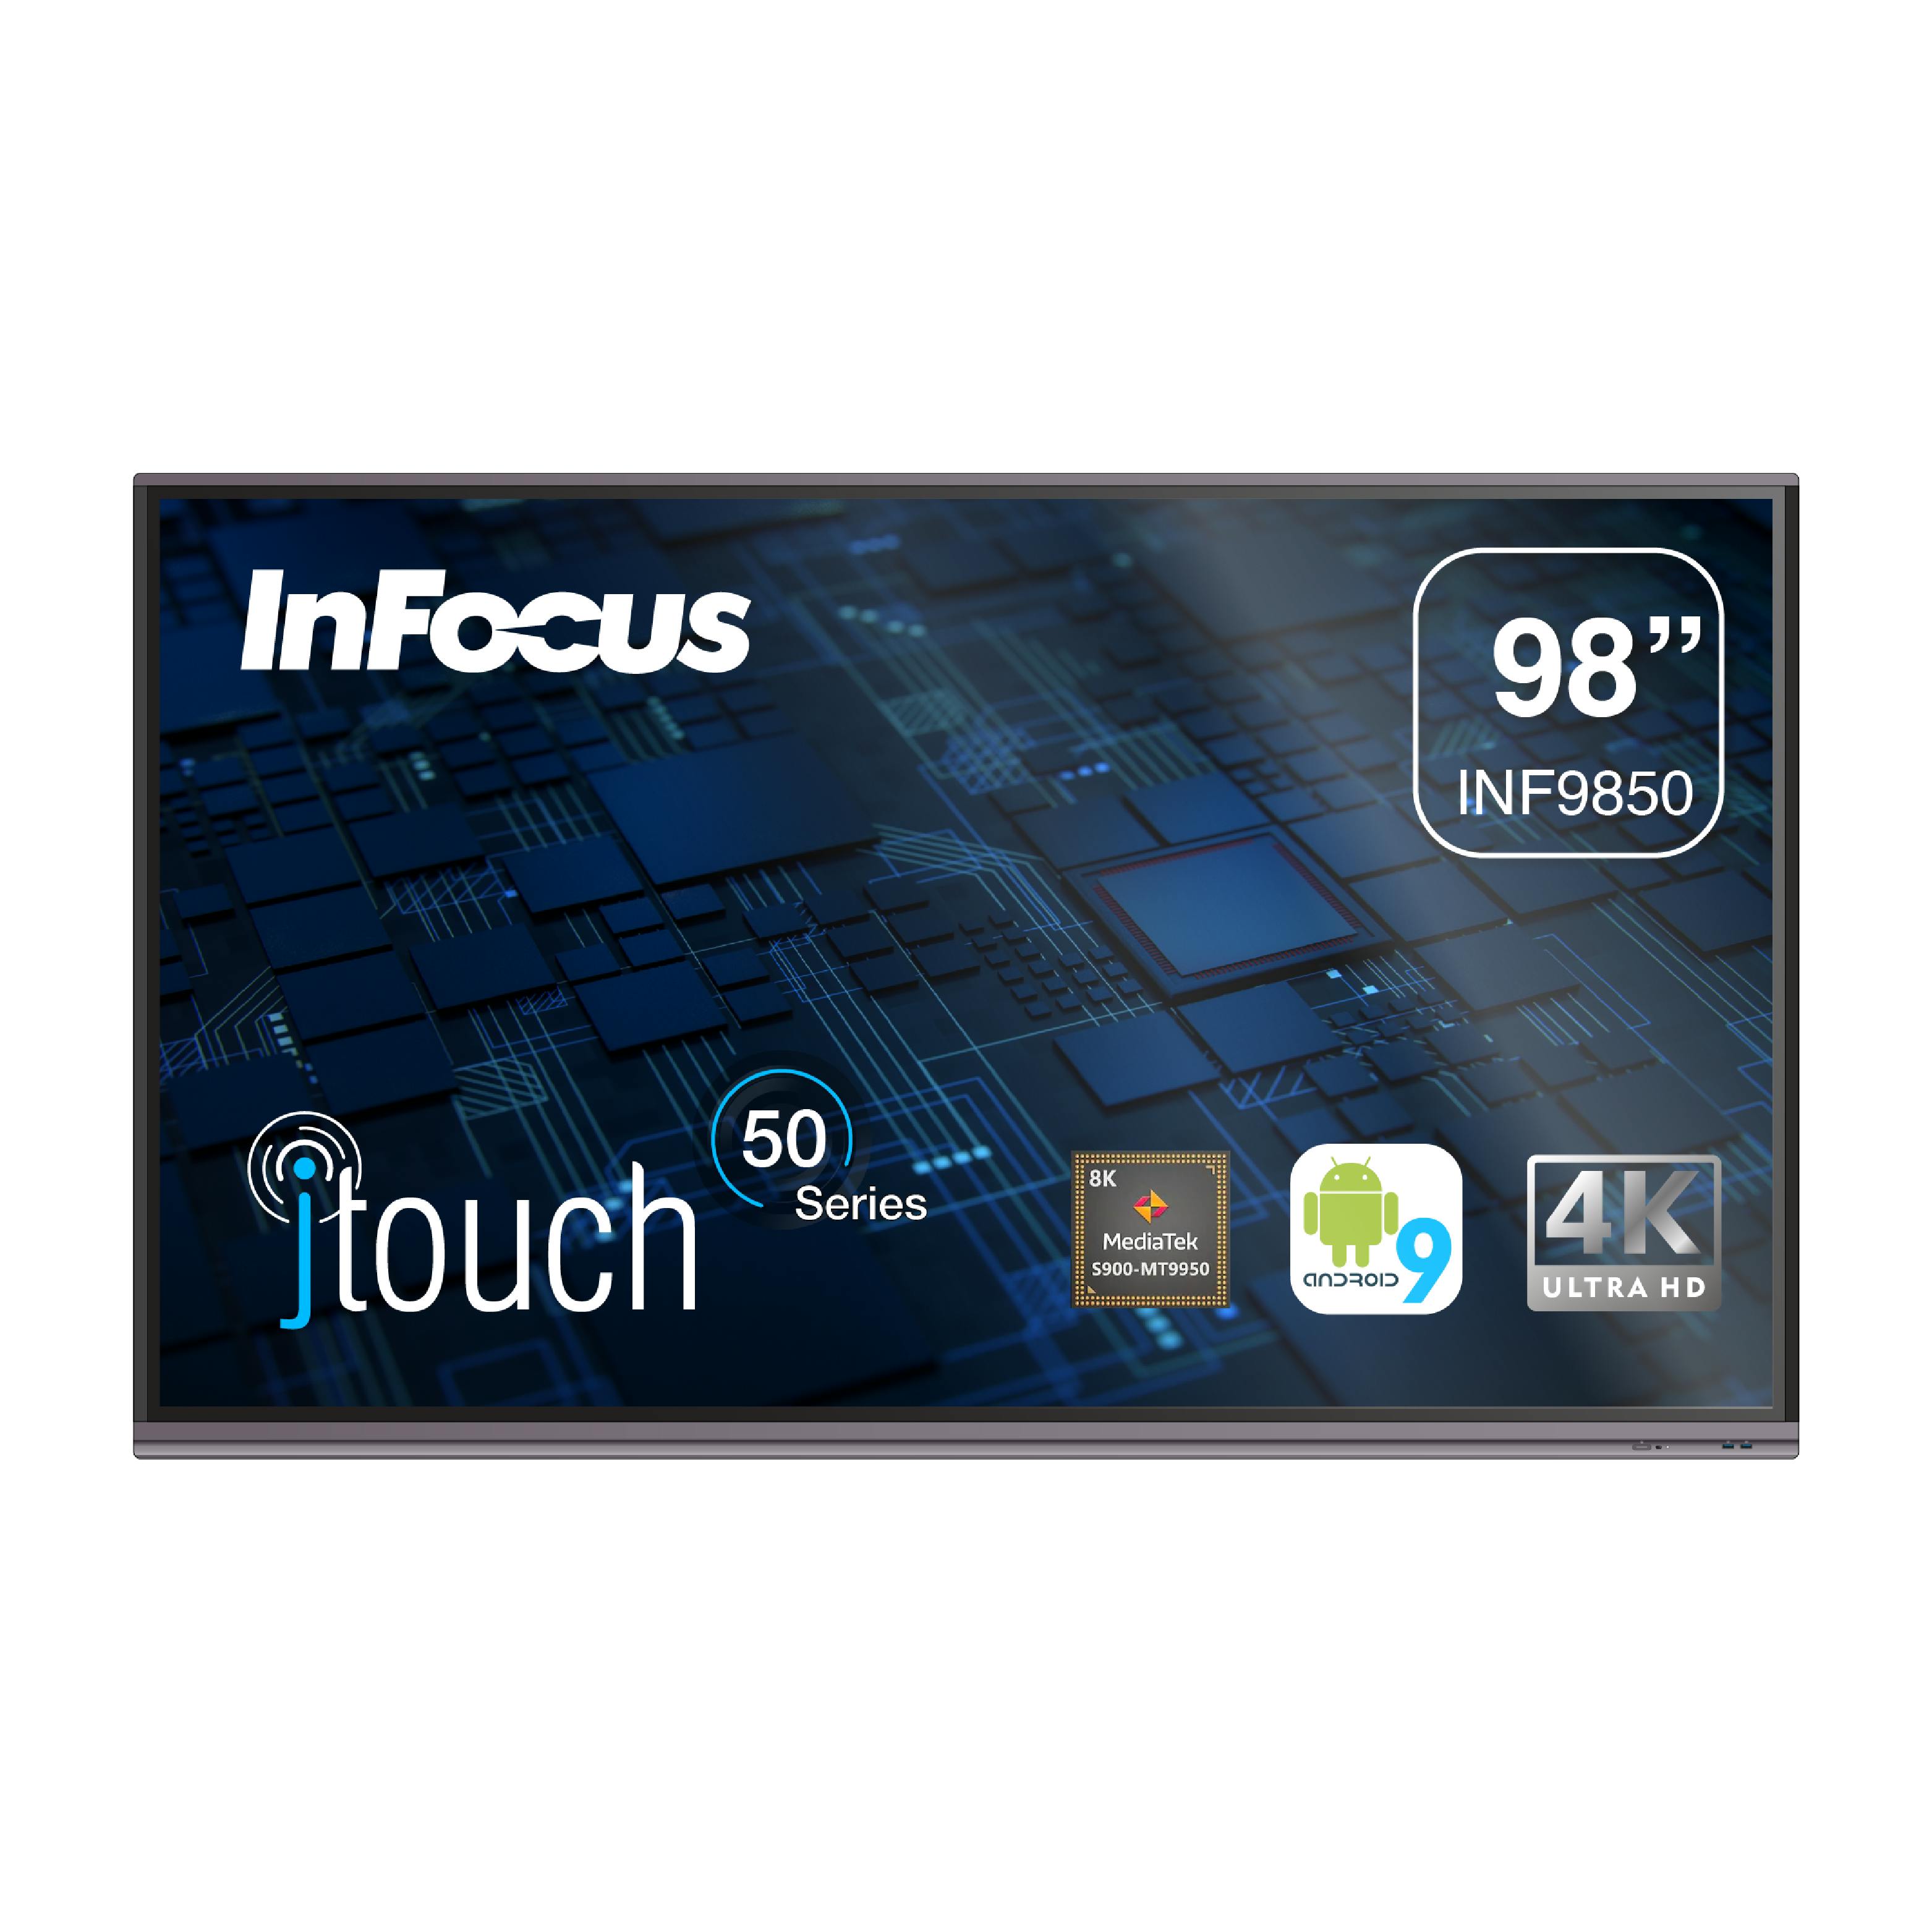 https://infocus.imgix.net/2022/04/JTouch-50-Series_INF9850_F_90-01.png?auto=compress%2Cformat&ixlib=php-3.3.1